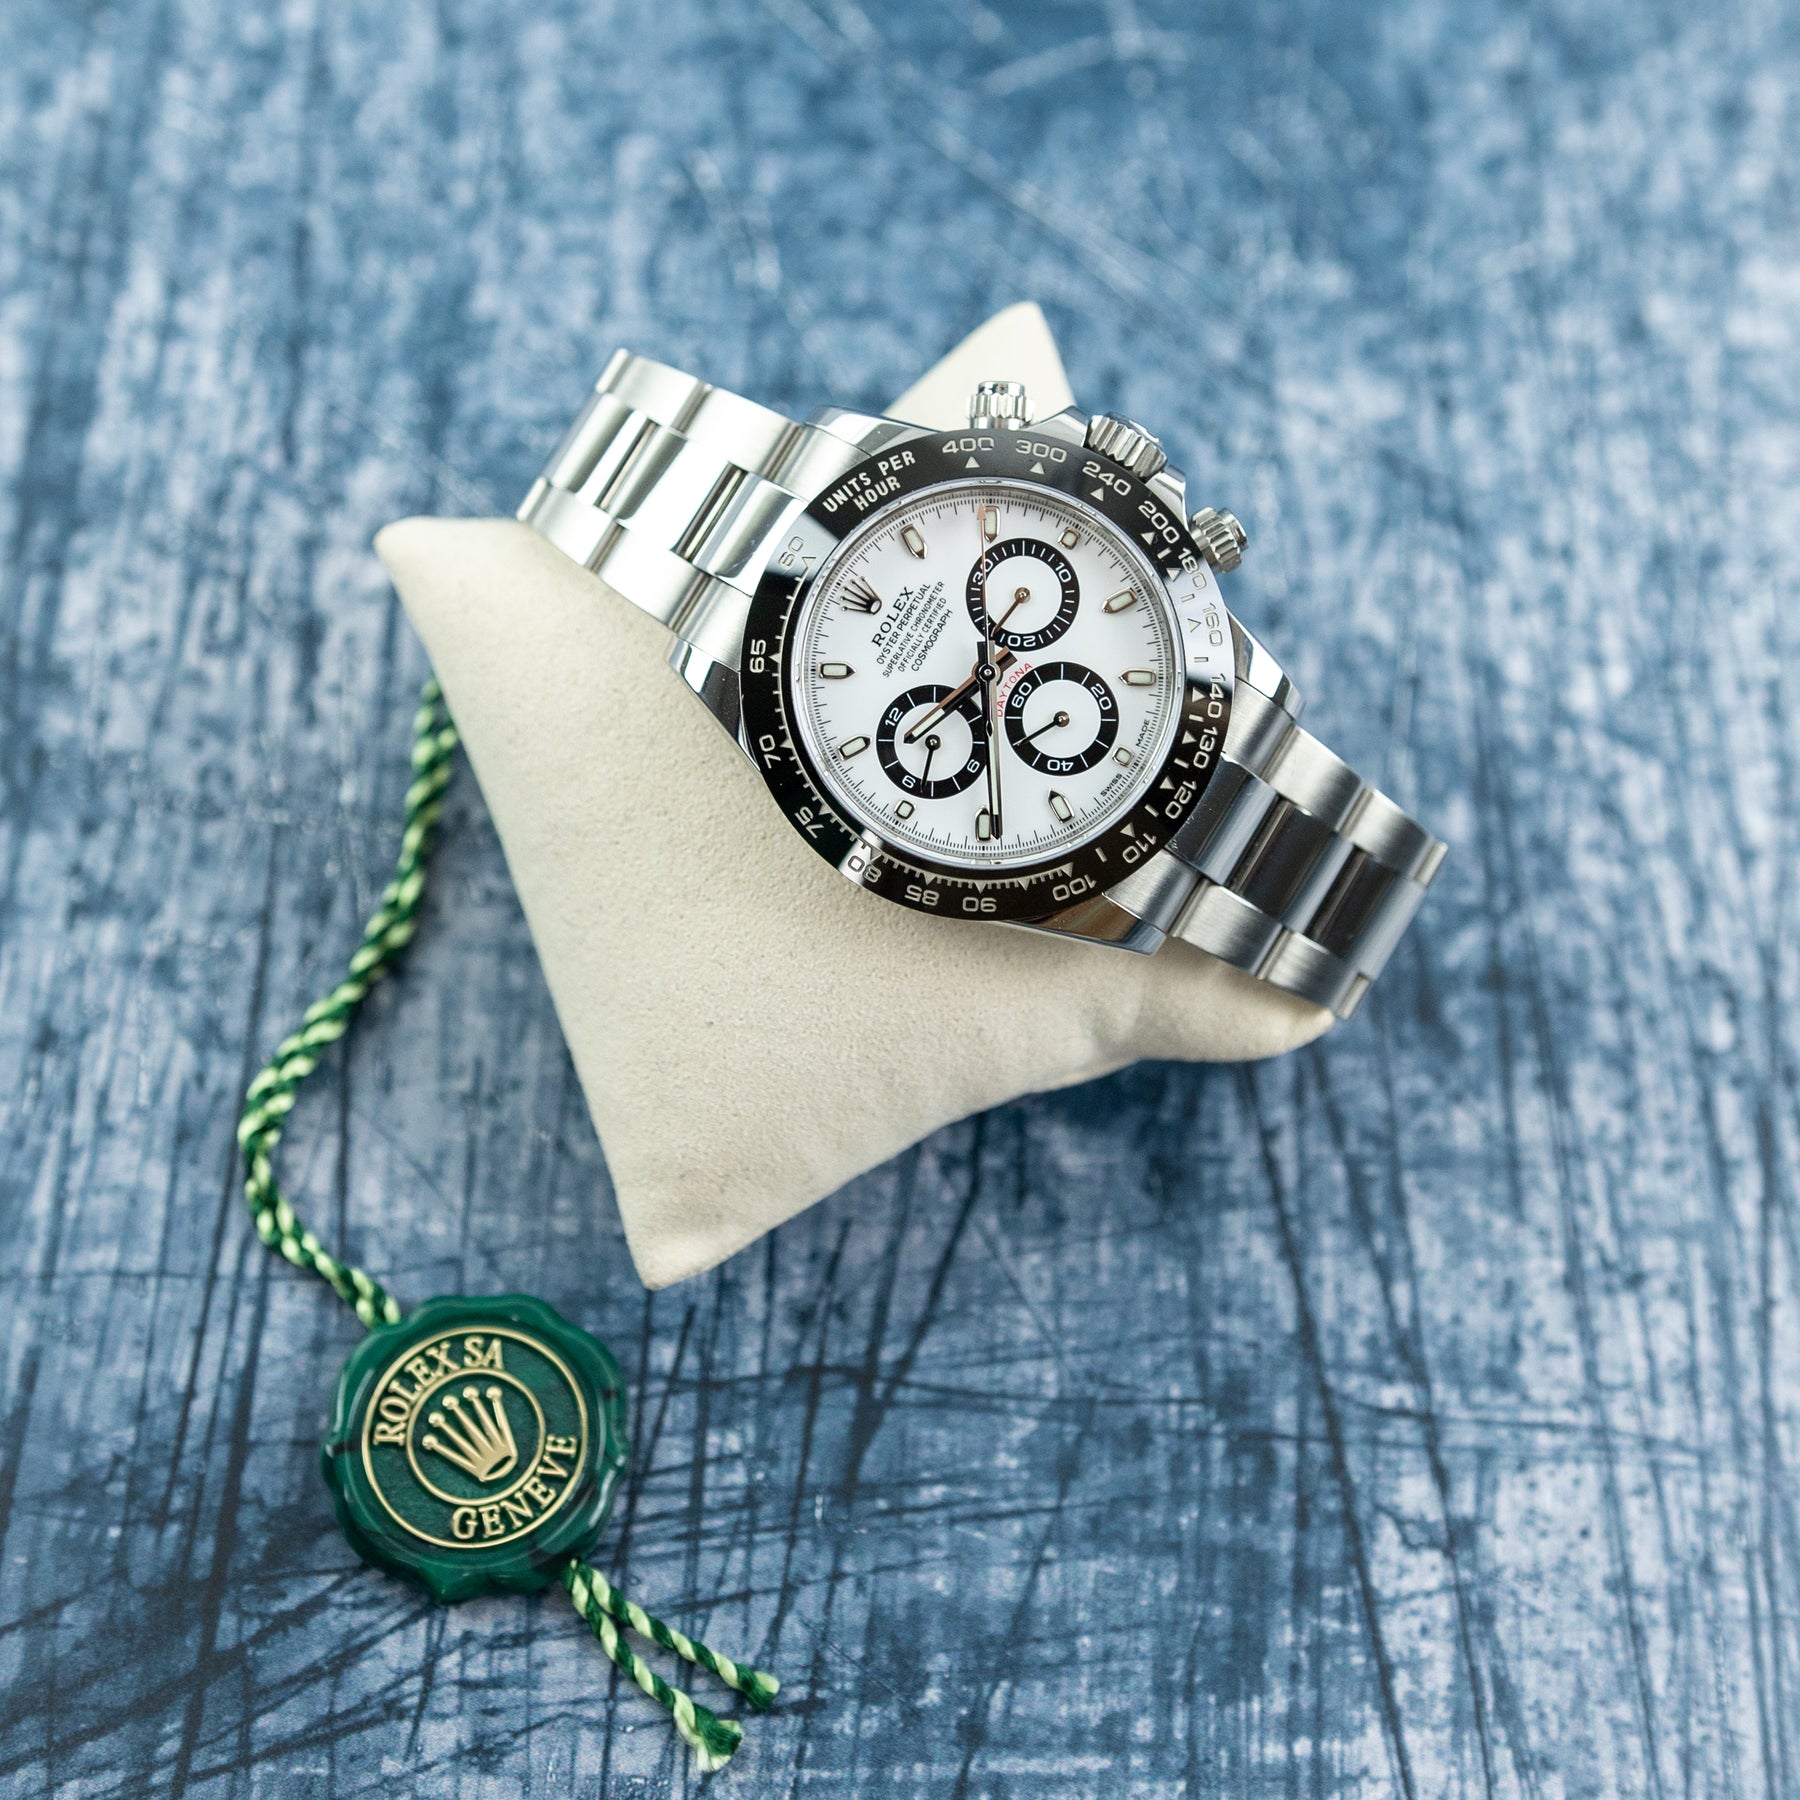 2021 Rolex COSMOGRAPH DAYTONA Oystersteel, Panda Dial 116500 available at RR Jewellers Yarm